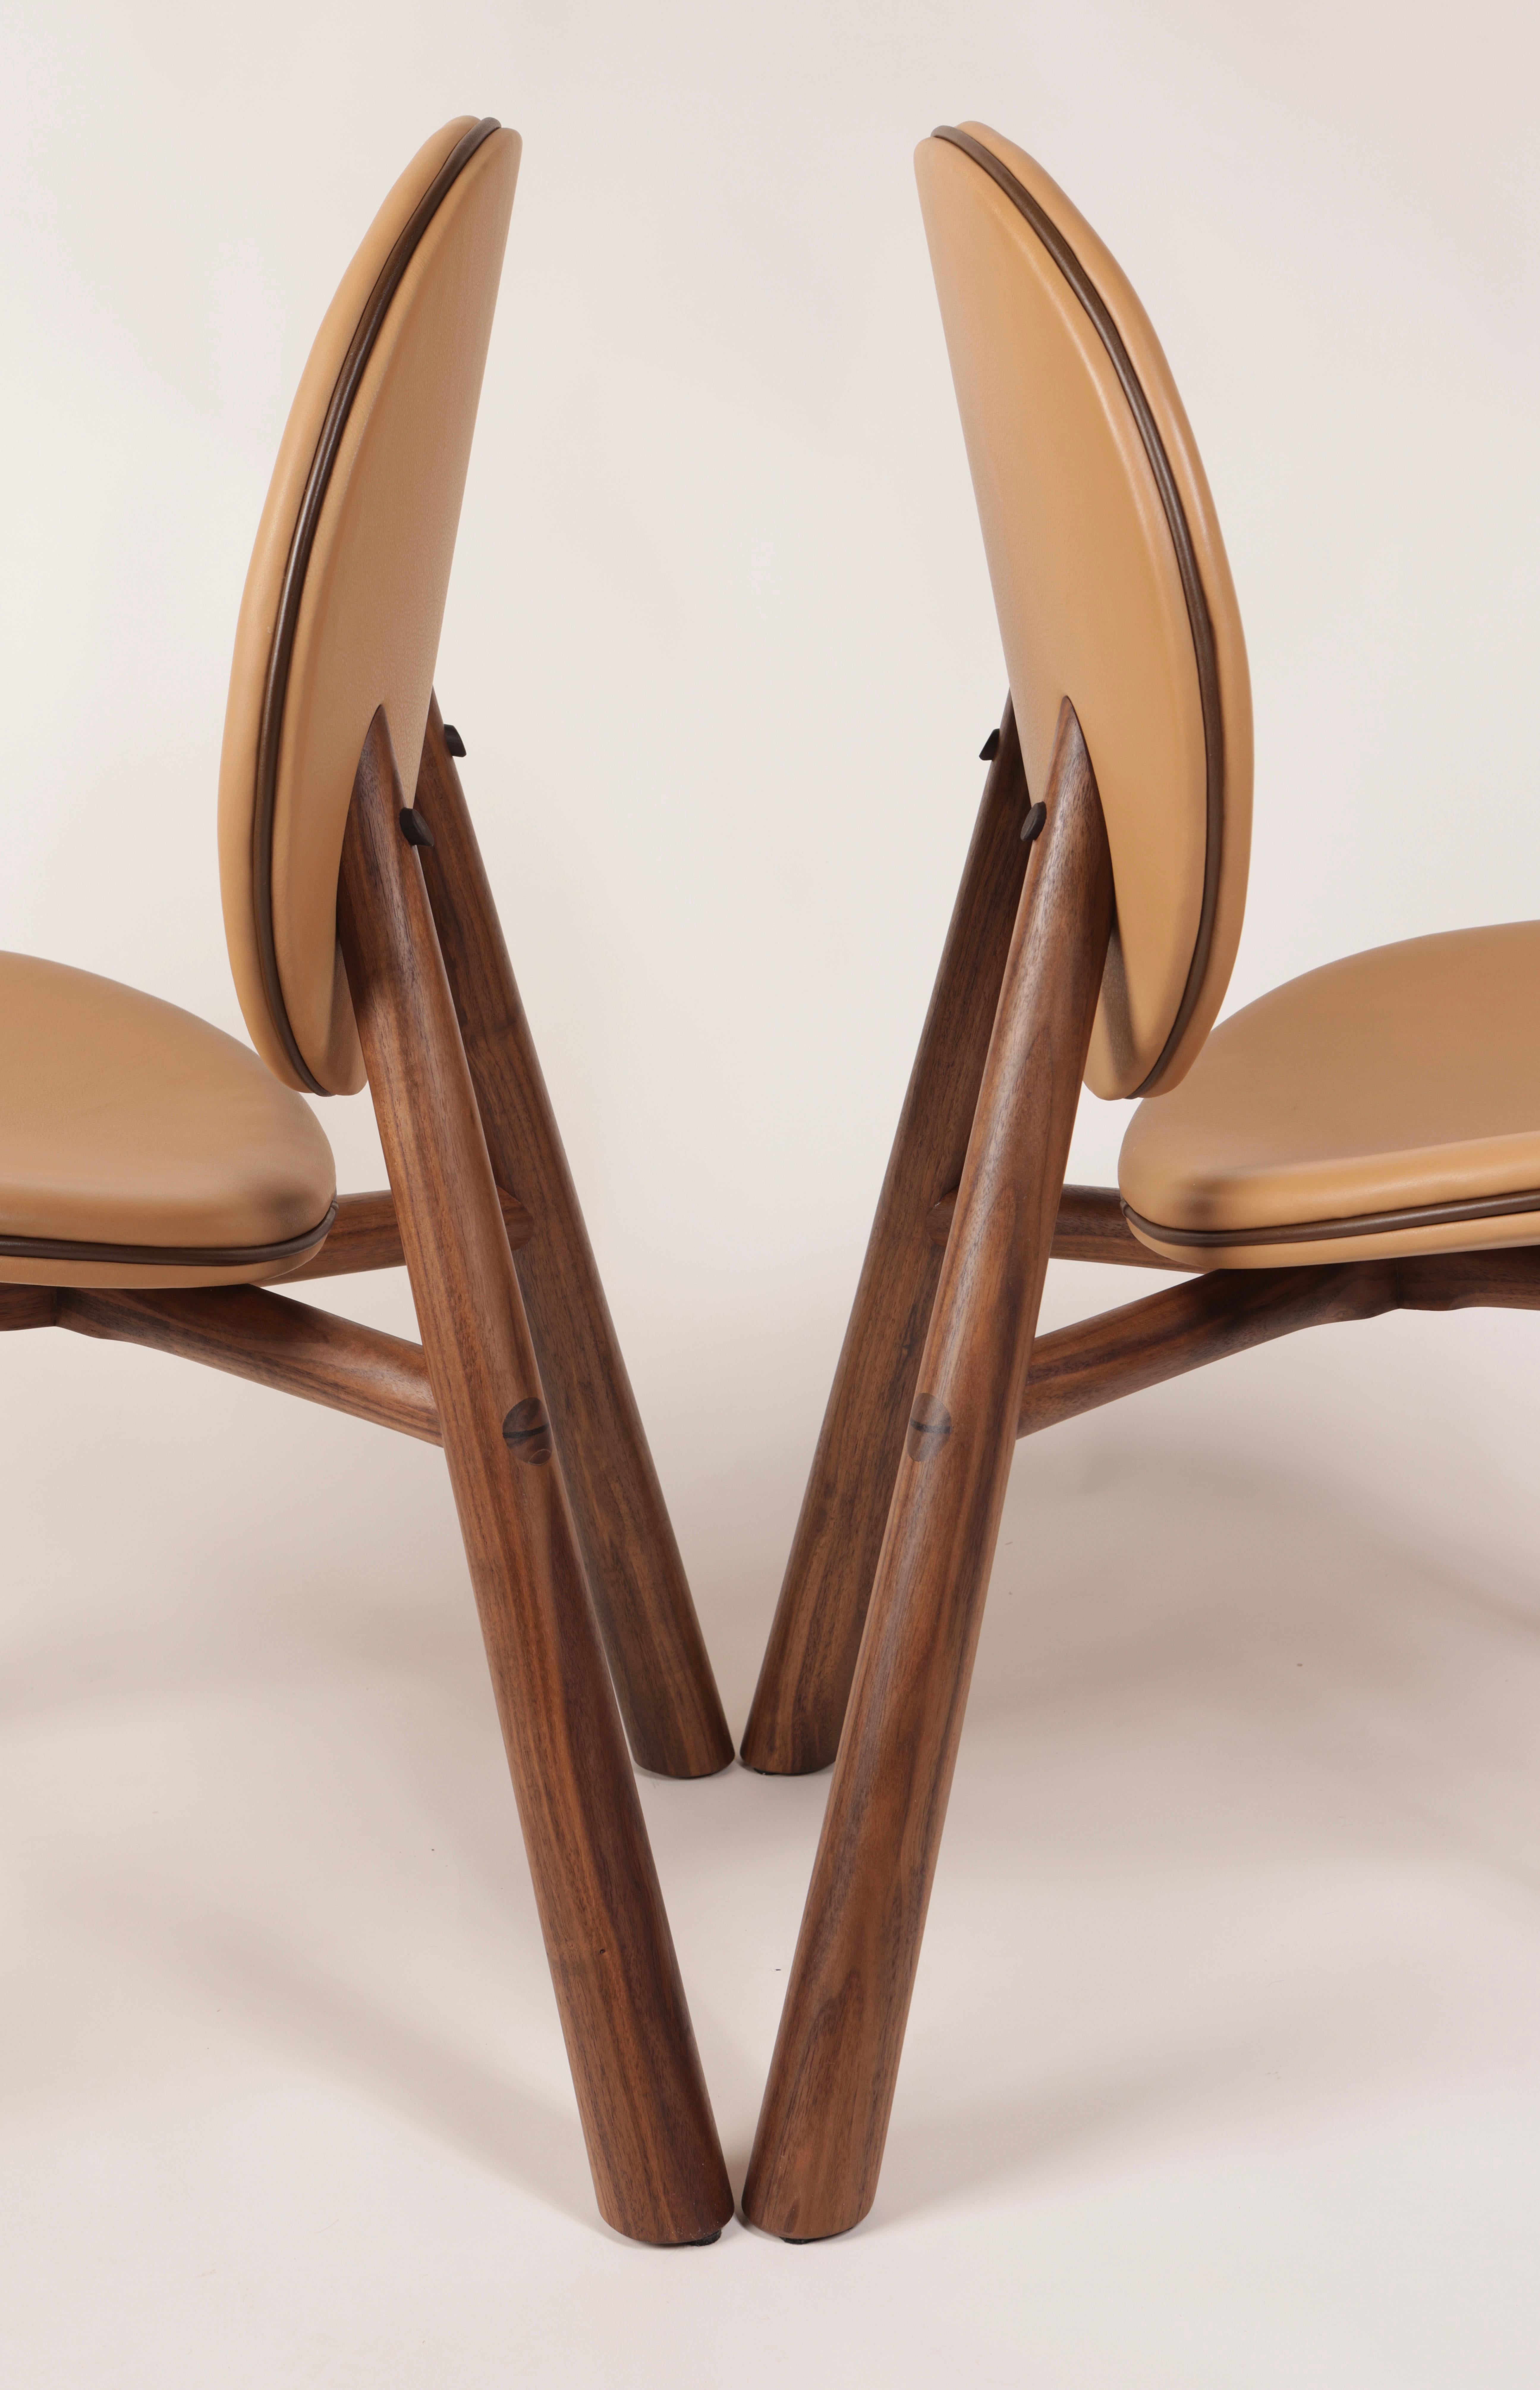 The Opus - a luxurious and playful chair huge on comfort. A modern design that showcases both a hand-turned, solid-wood frame and bespoke upholstery.  

Chairs are built to order in 4-5 weeks. Wood species include American Black Walnut (pictured),